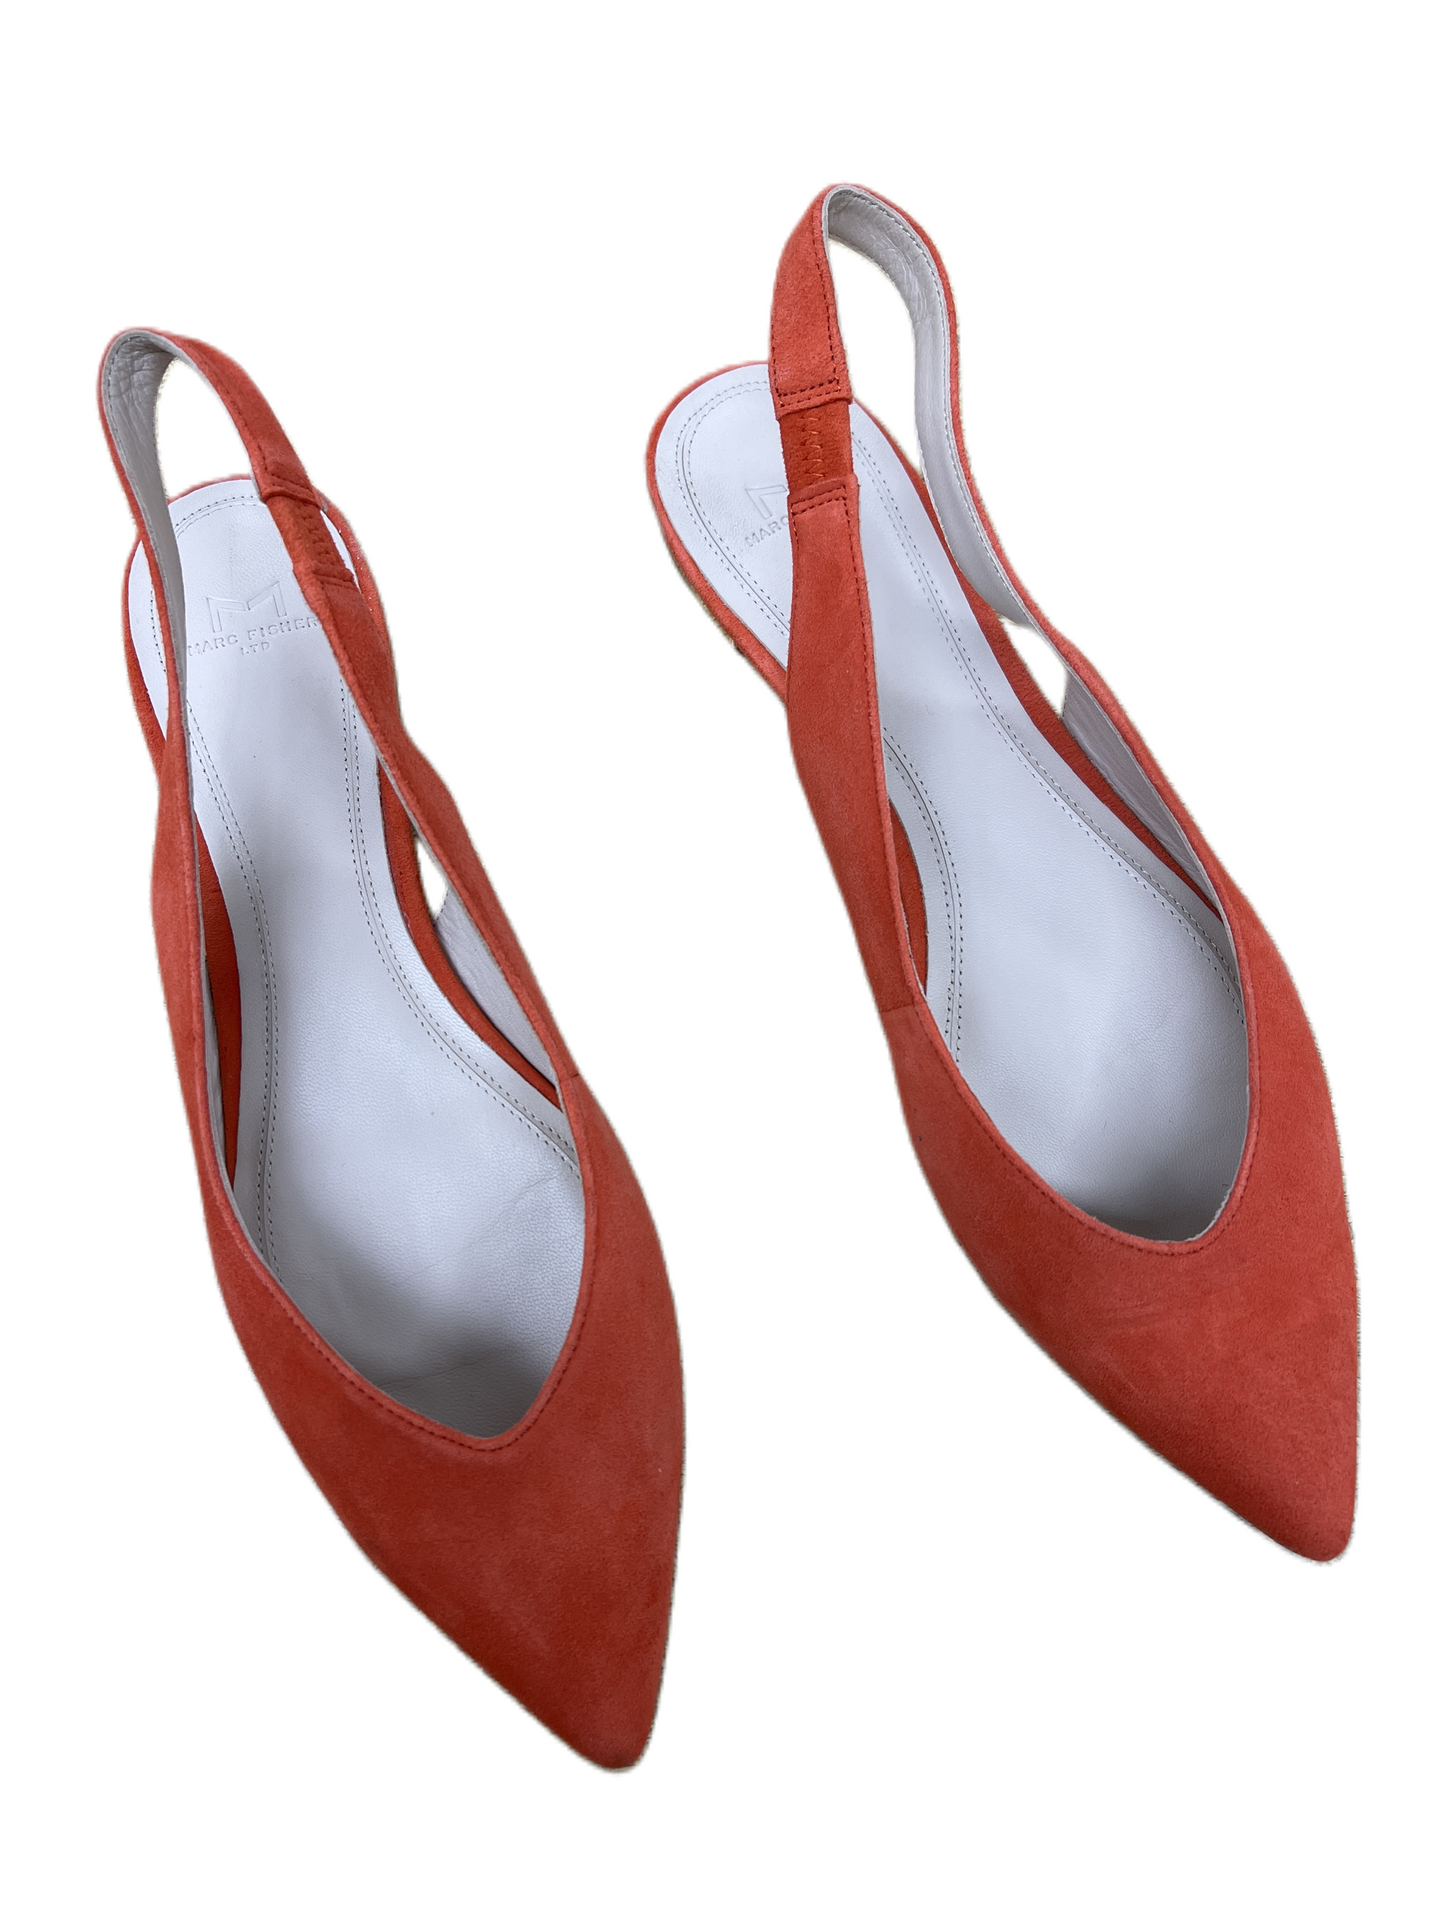 Shoes Flats By Marc Fisher  Size: 9